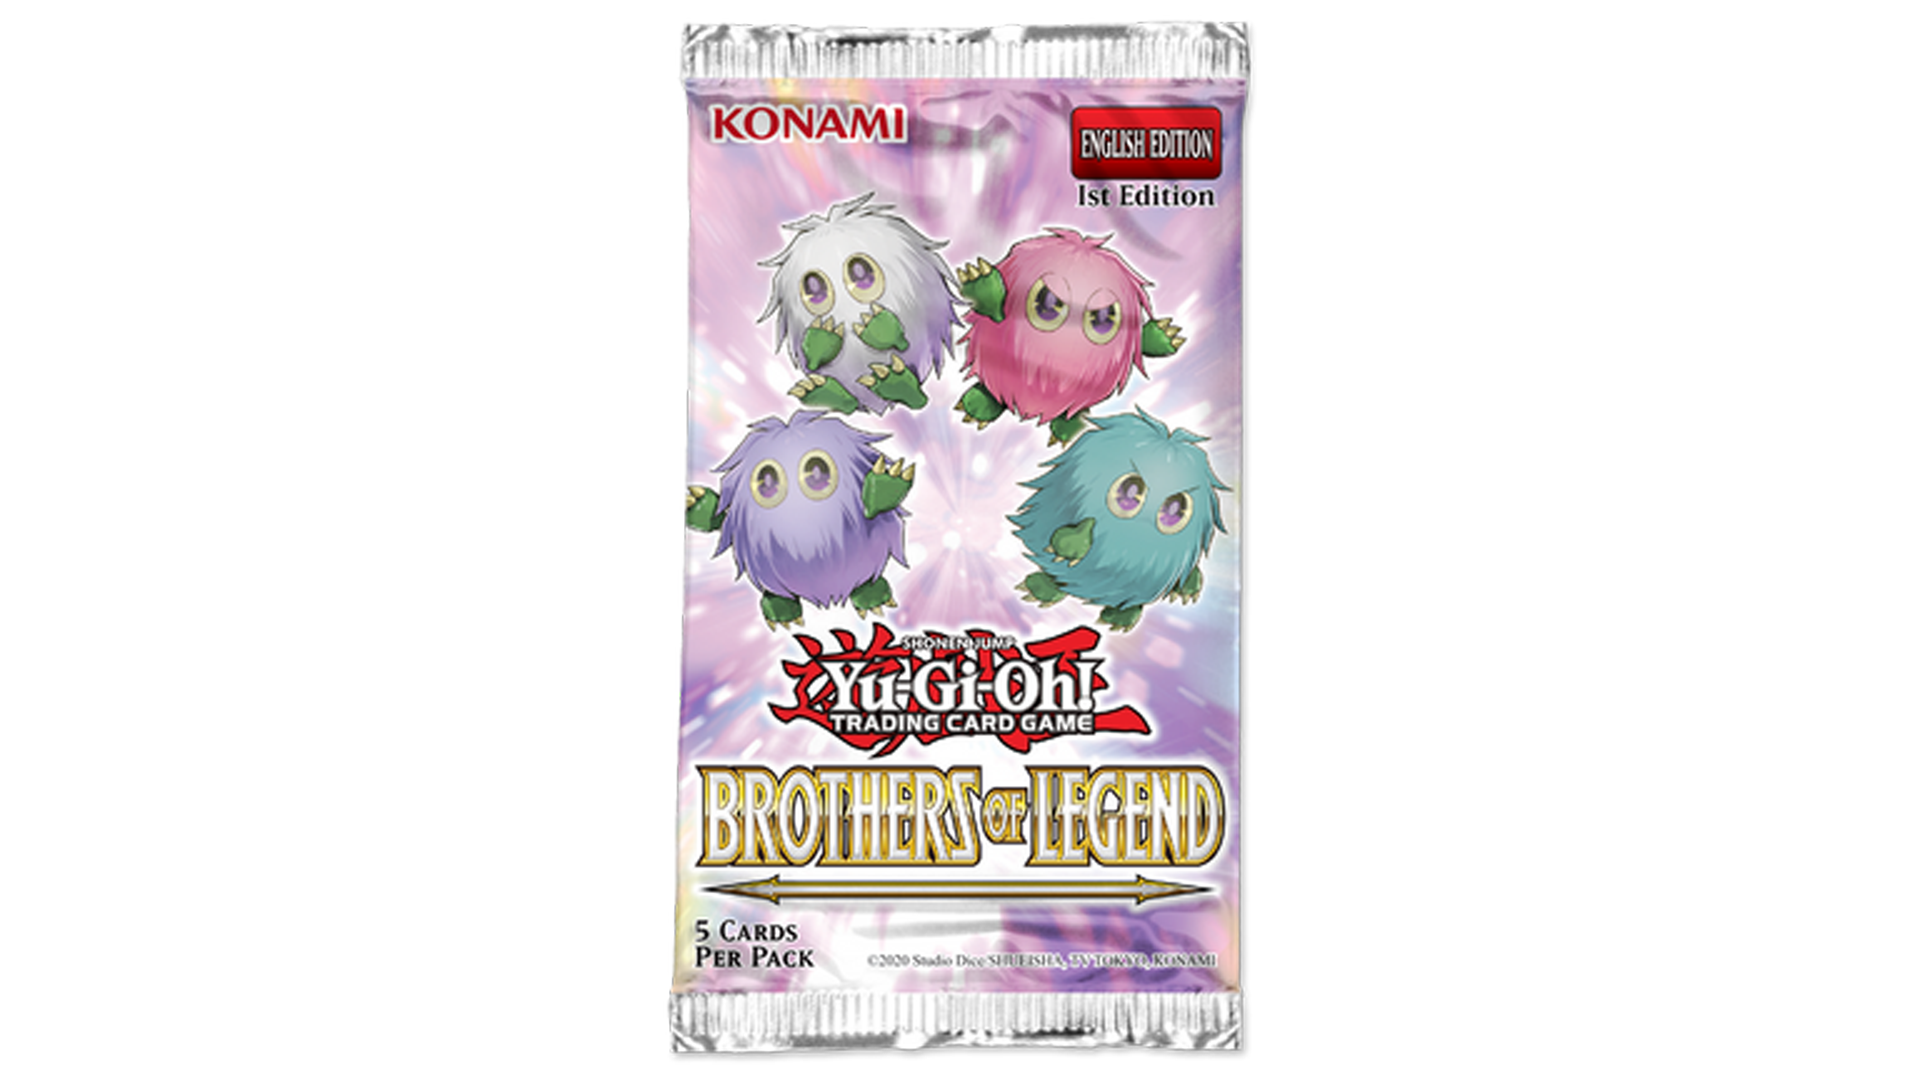 Yu-Gi-Oh! Trading Card Game - Brothers of Legend booster pack